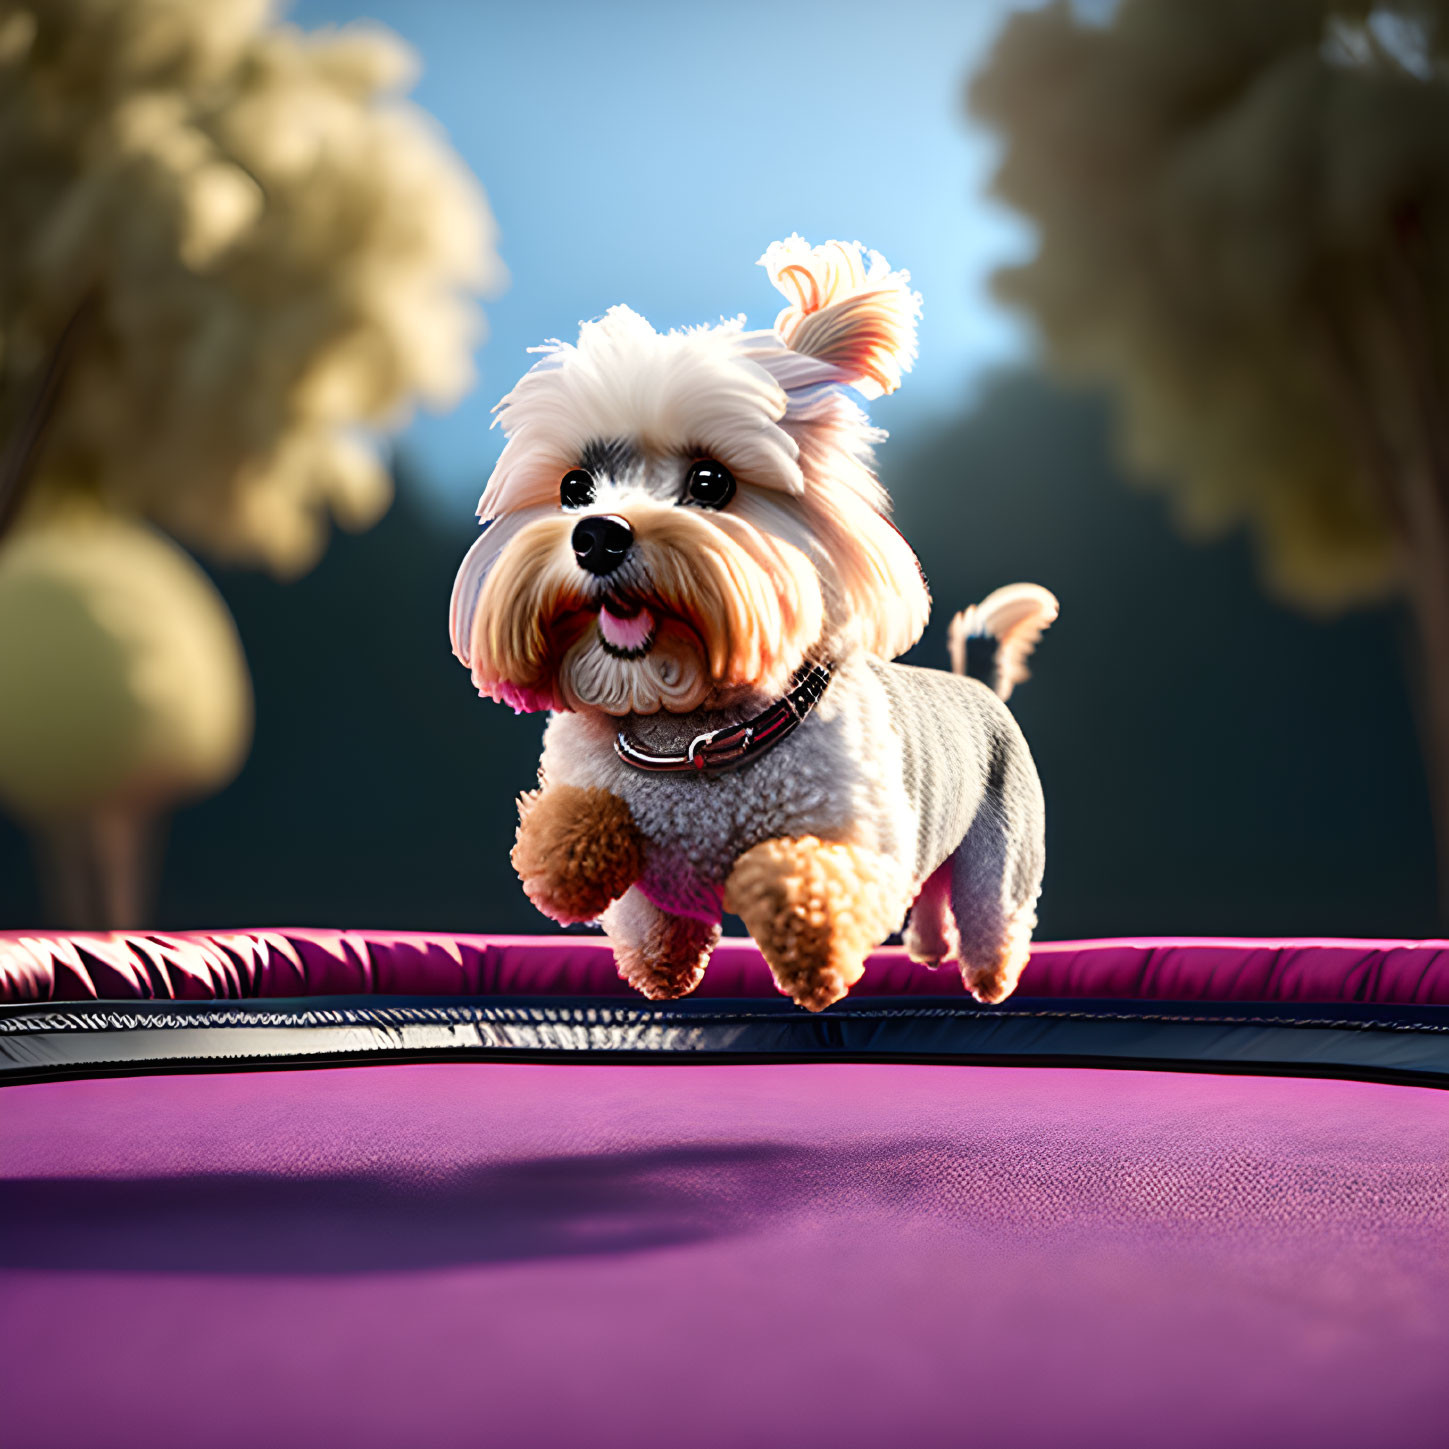 Fluffy small dog with bow on head on purple trampoline at twilight